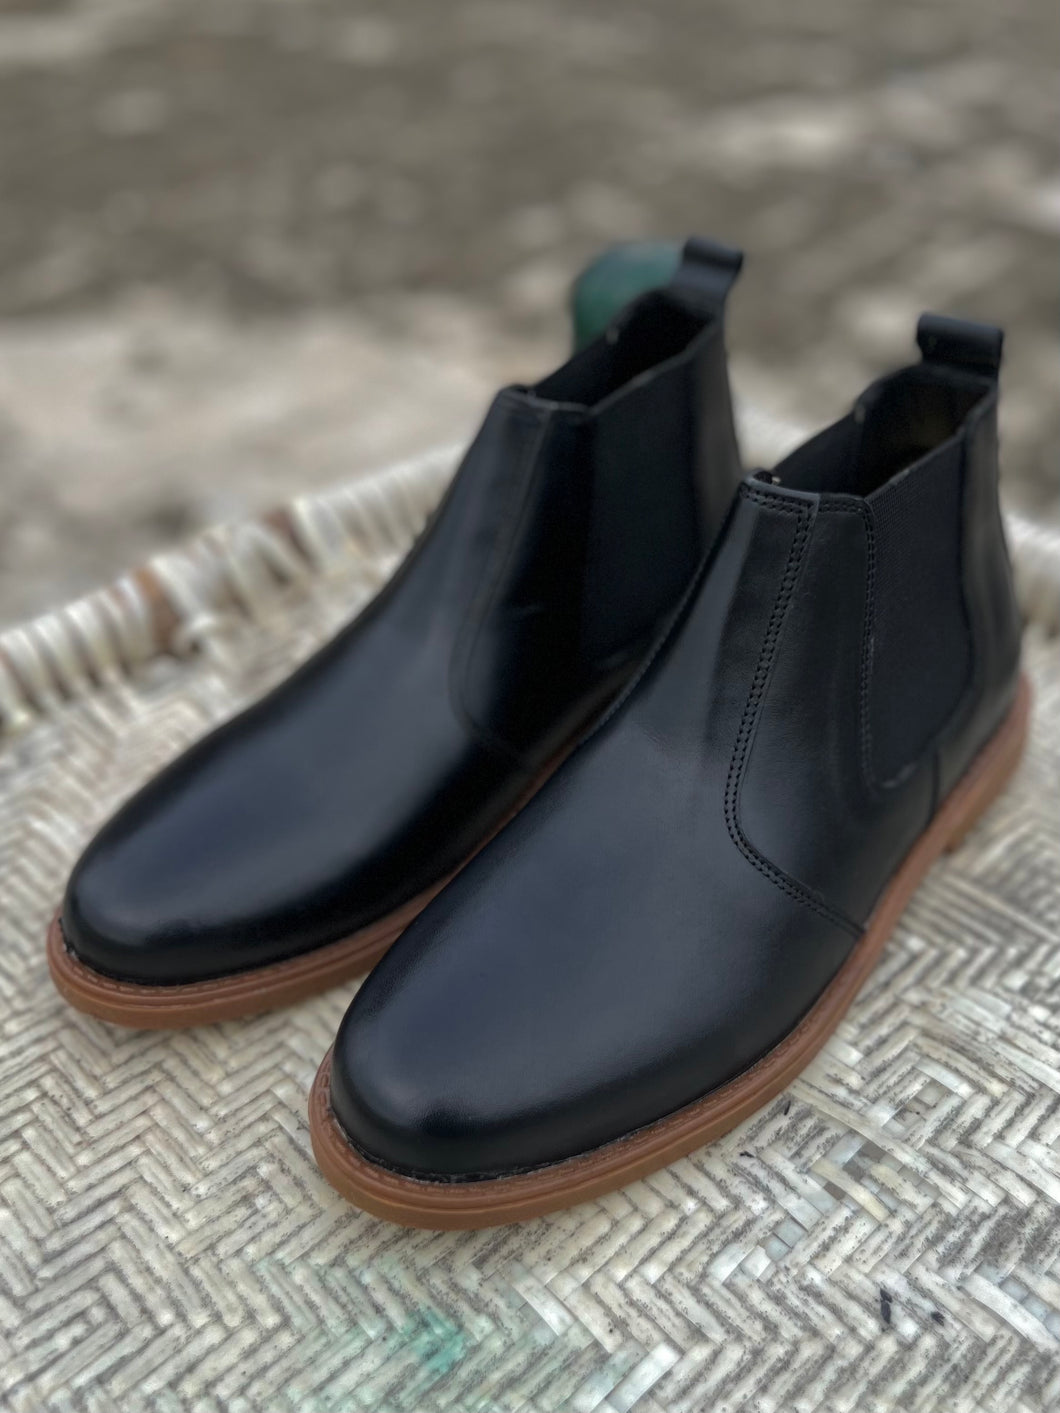 Black Cow Leather Chelsea Boots - Cream Sole